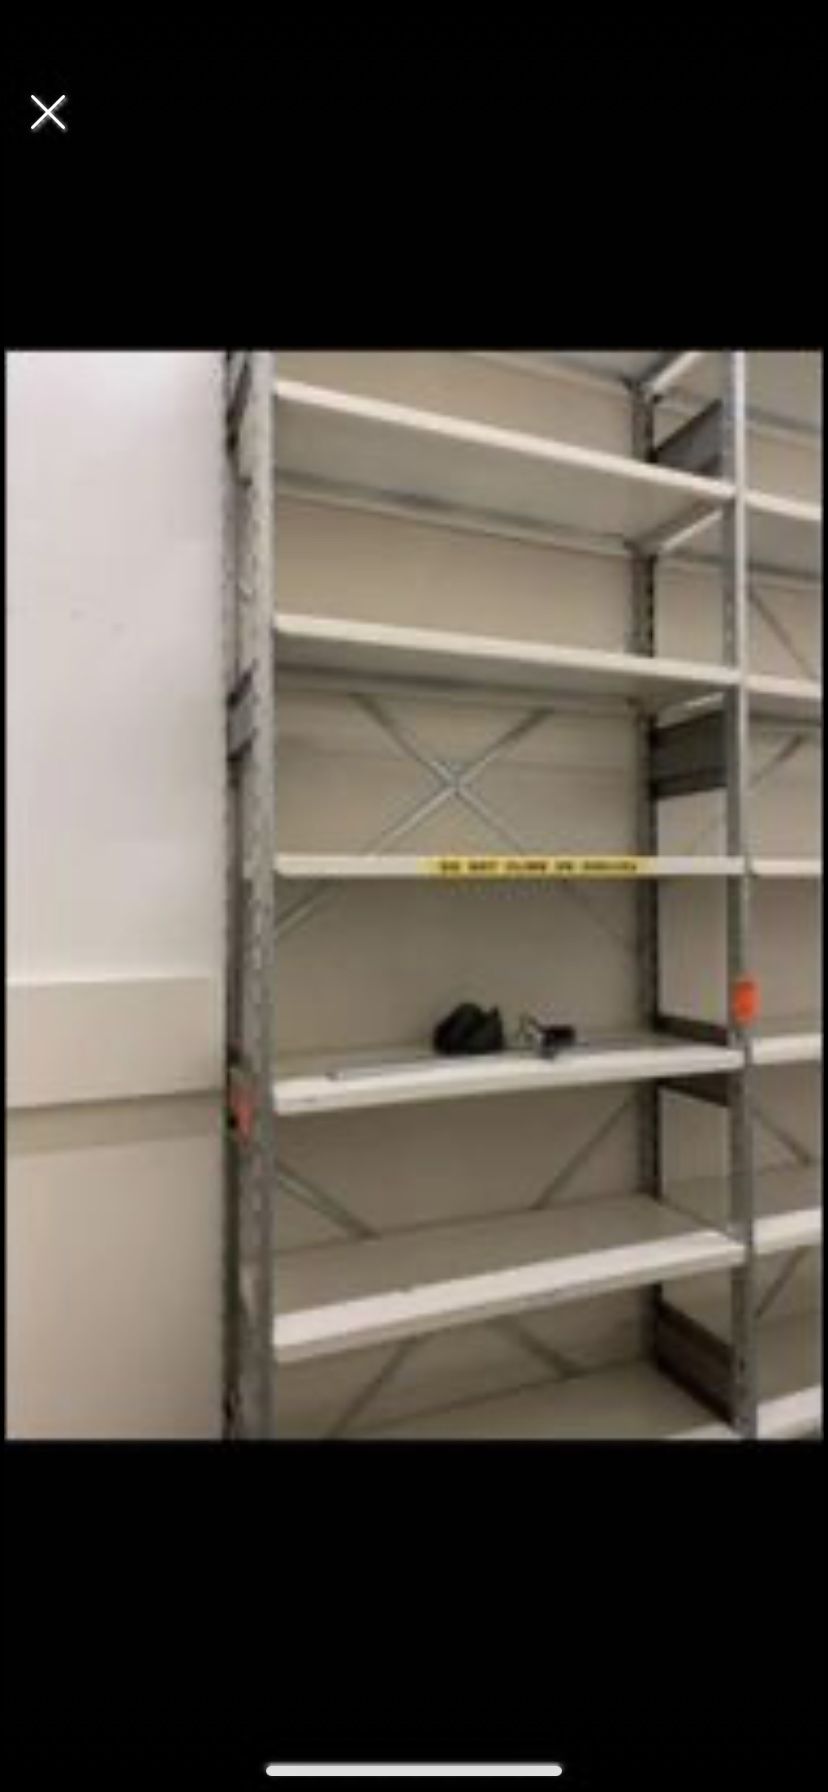 Industrial Adjustable Shelving for business, home or garage JUST REDUCED $90 per section